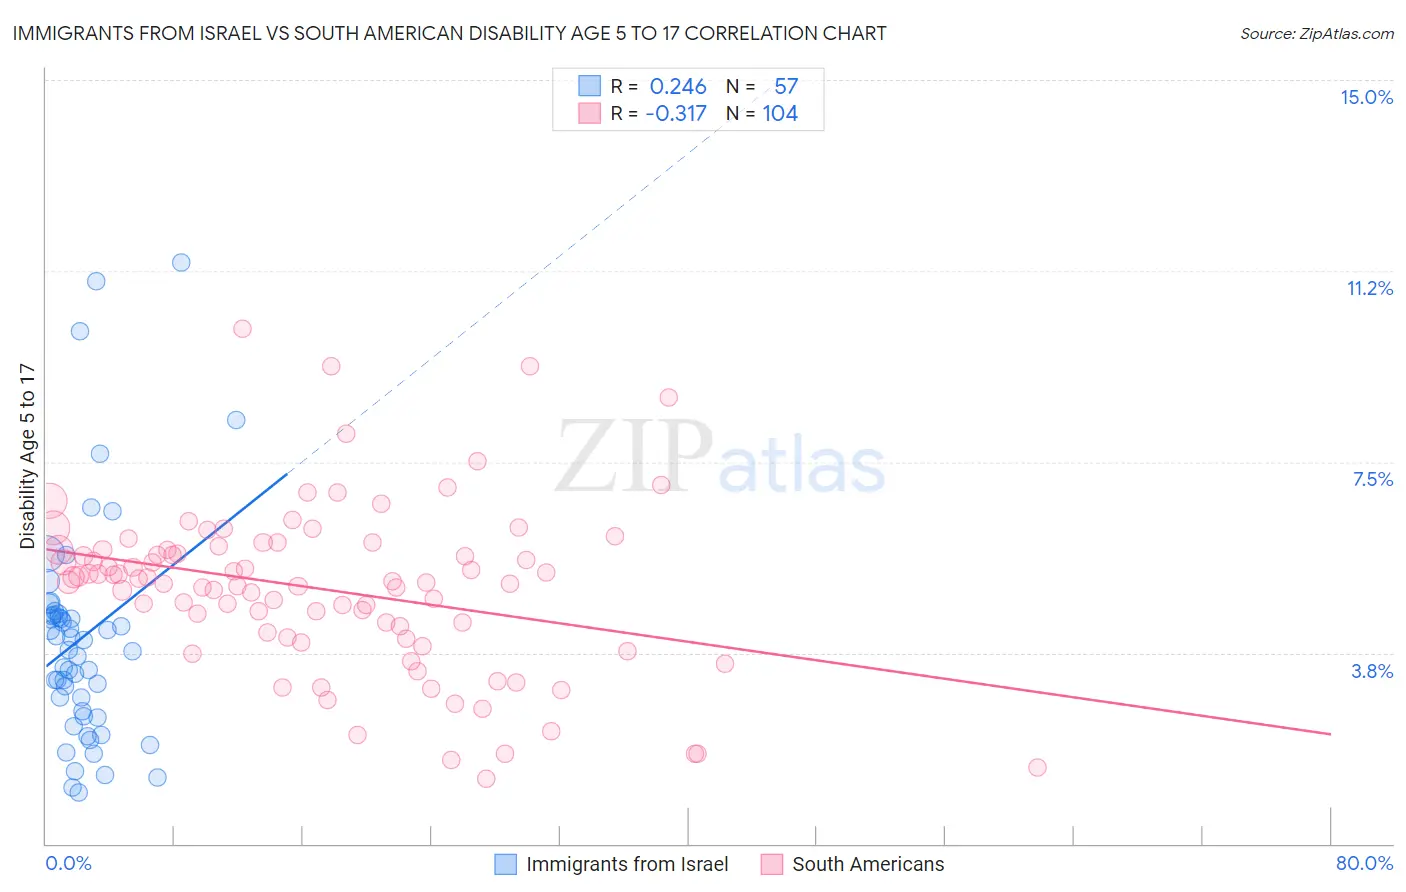 Immigrants from Israel vs South American Disability Age 5 to 17